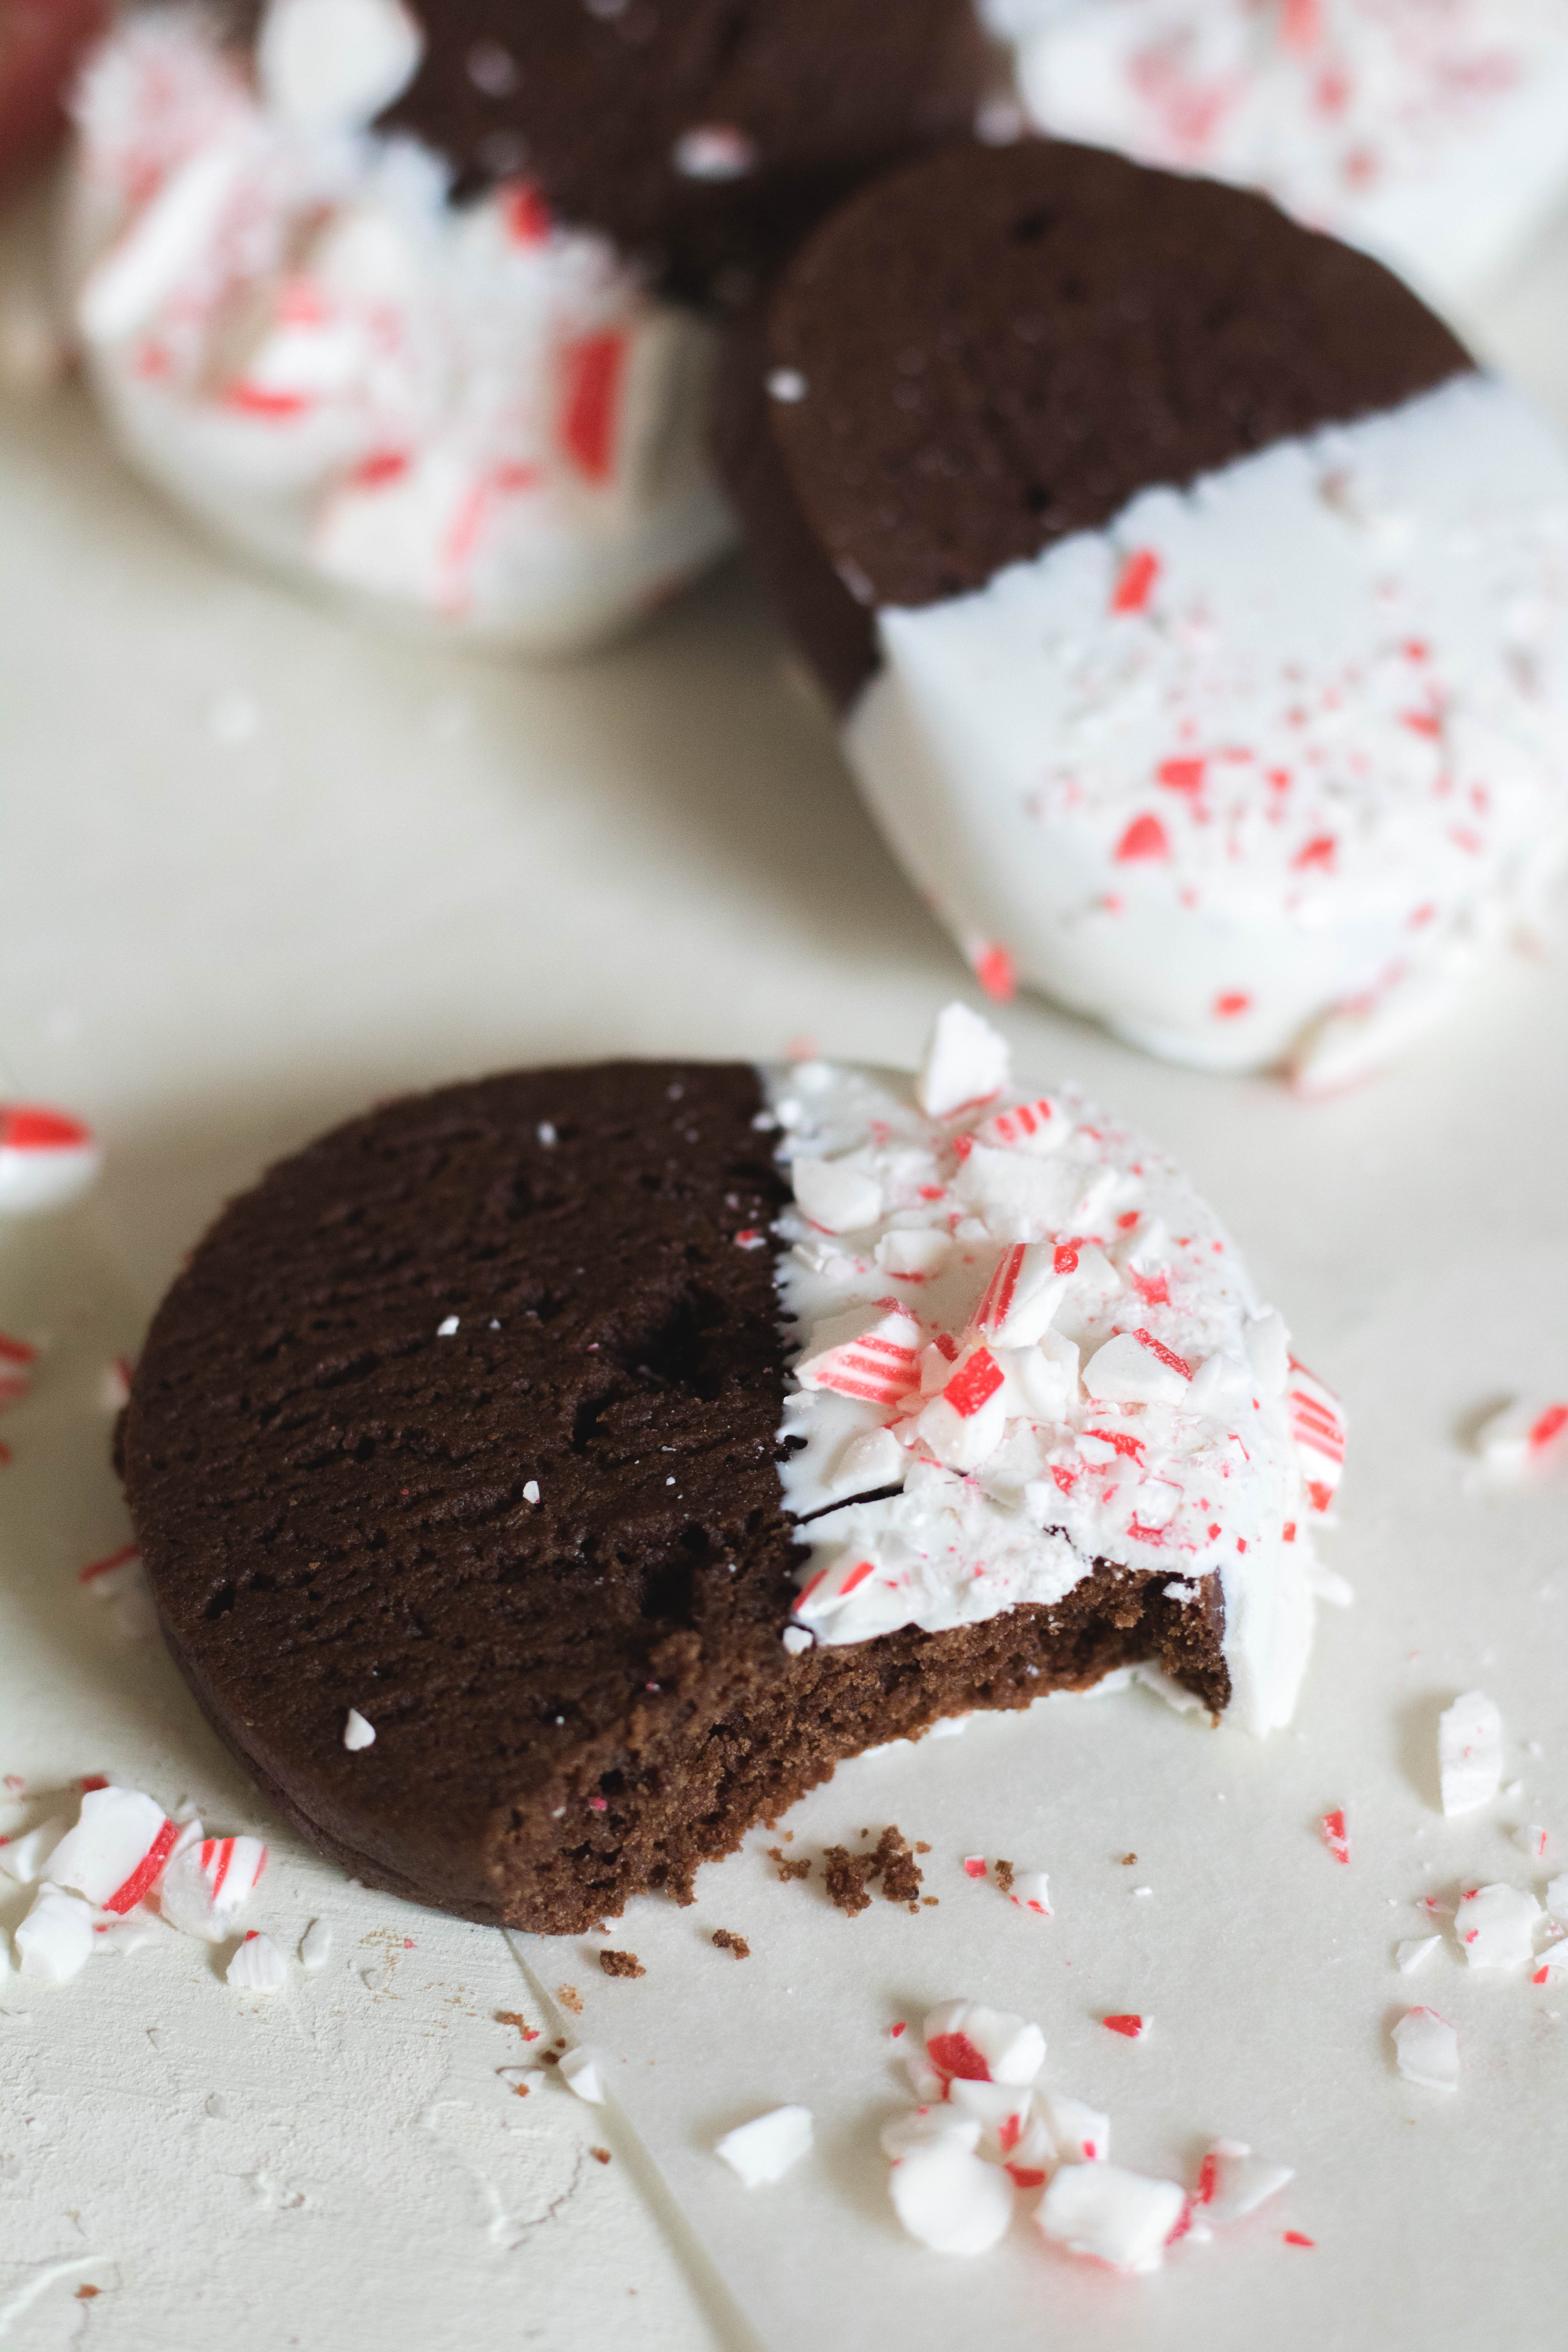 Candy cane crunch slice and bake chocolate cookies